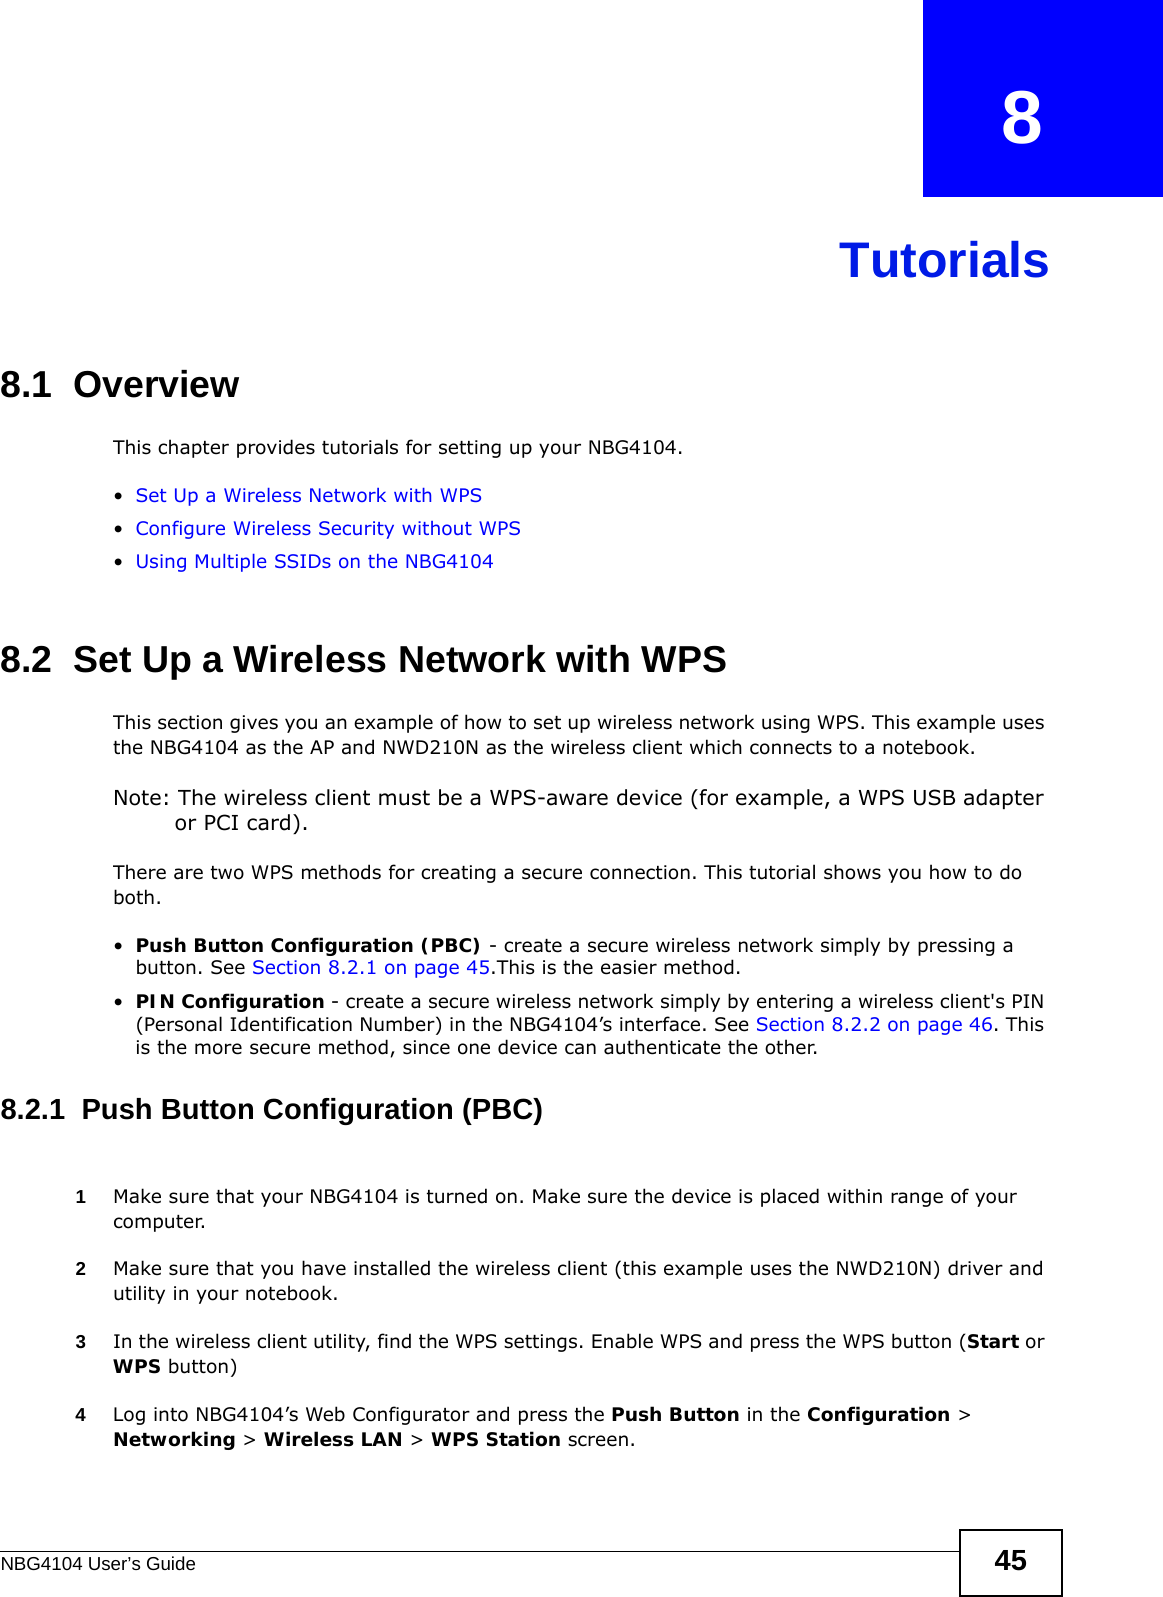 NBG4104 User’s Guide 45CHAPTER   8Tutorials8.1  OverviewThis chapter provides tutorials for setting up your NBG4104.•Set Up a Wireless Network with WPS•Configure Wireless Security without WPS•Using Multiple SSIDs on the NBG41048.2  Set Up a Wireless Network with WPSThis section gives you an example of how to set up wireless network using WPS. This example uses the NBG4104 as the AP and NWD210N as the wireless client which connects to a notebook. Note: The wireless client must be a WPS-aware device (for example, a WPS USB adapter or PCI card).There are two WPS methods for creating a secure connection. This tutorial shows you how to do both.•Push Button Configuration (PBC) - create a secure wireless network simply by pressing a button. See Section 8.2.1 on page 45.This is the easier method.•PIN Configuration - create a secure wireless network simply by entering a wireless client&apos;s PIN (Personal Identification Number) in the NBG4104’s interface. See Section 8.2.2 on page 46. This is the more secure method, since one device can authenticate the other.8.2.1  Push Button Configuration (PBC)1Make sure that your NBG4104 is turned on. Make sure the device is placed within range of your computer. 2Make sure that you have installed the wireless client (this example uses the NWD210N) driver and utility in your notebook.3In the wireless client utility, find the WPS settings. Enable WPS and press the WPS button (Start or WPS button)4Log into NBG4104’s Web Configurator and press the Push Button in the Configuration &gt; Networking &gt; Wireless LAN &gt; WPS Station screen. 